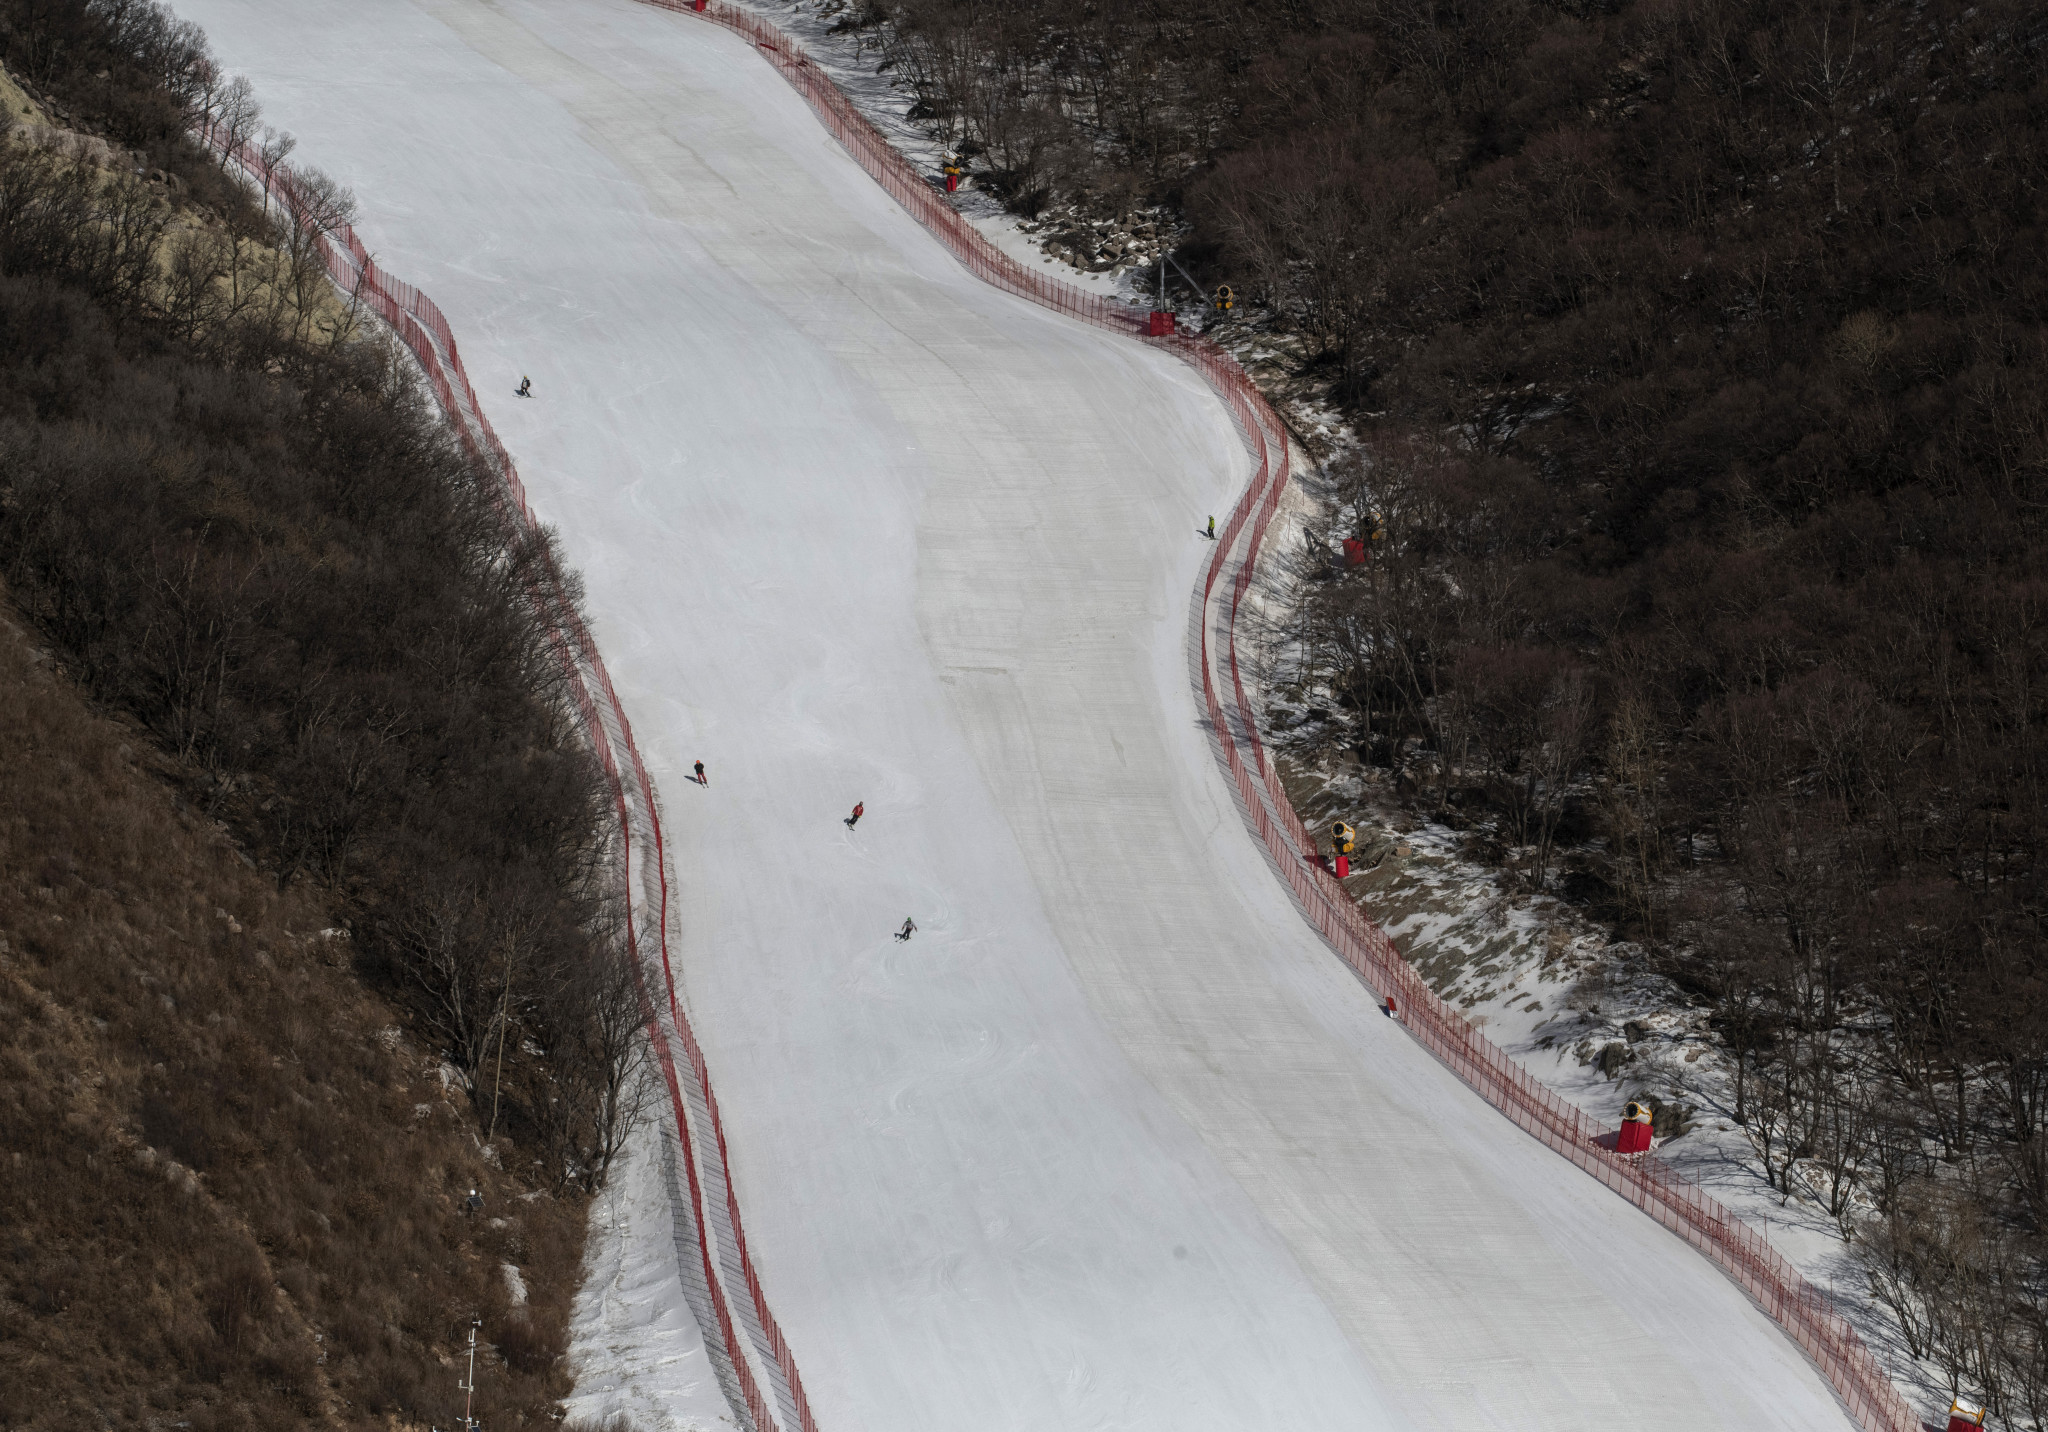 Artificial snow will be crucial to the Alpine skiing venue in Yanqing ©Getty Images